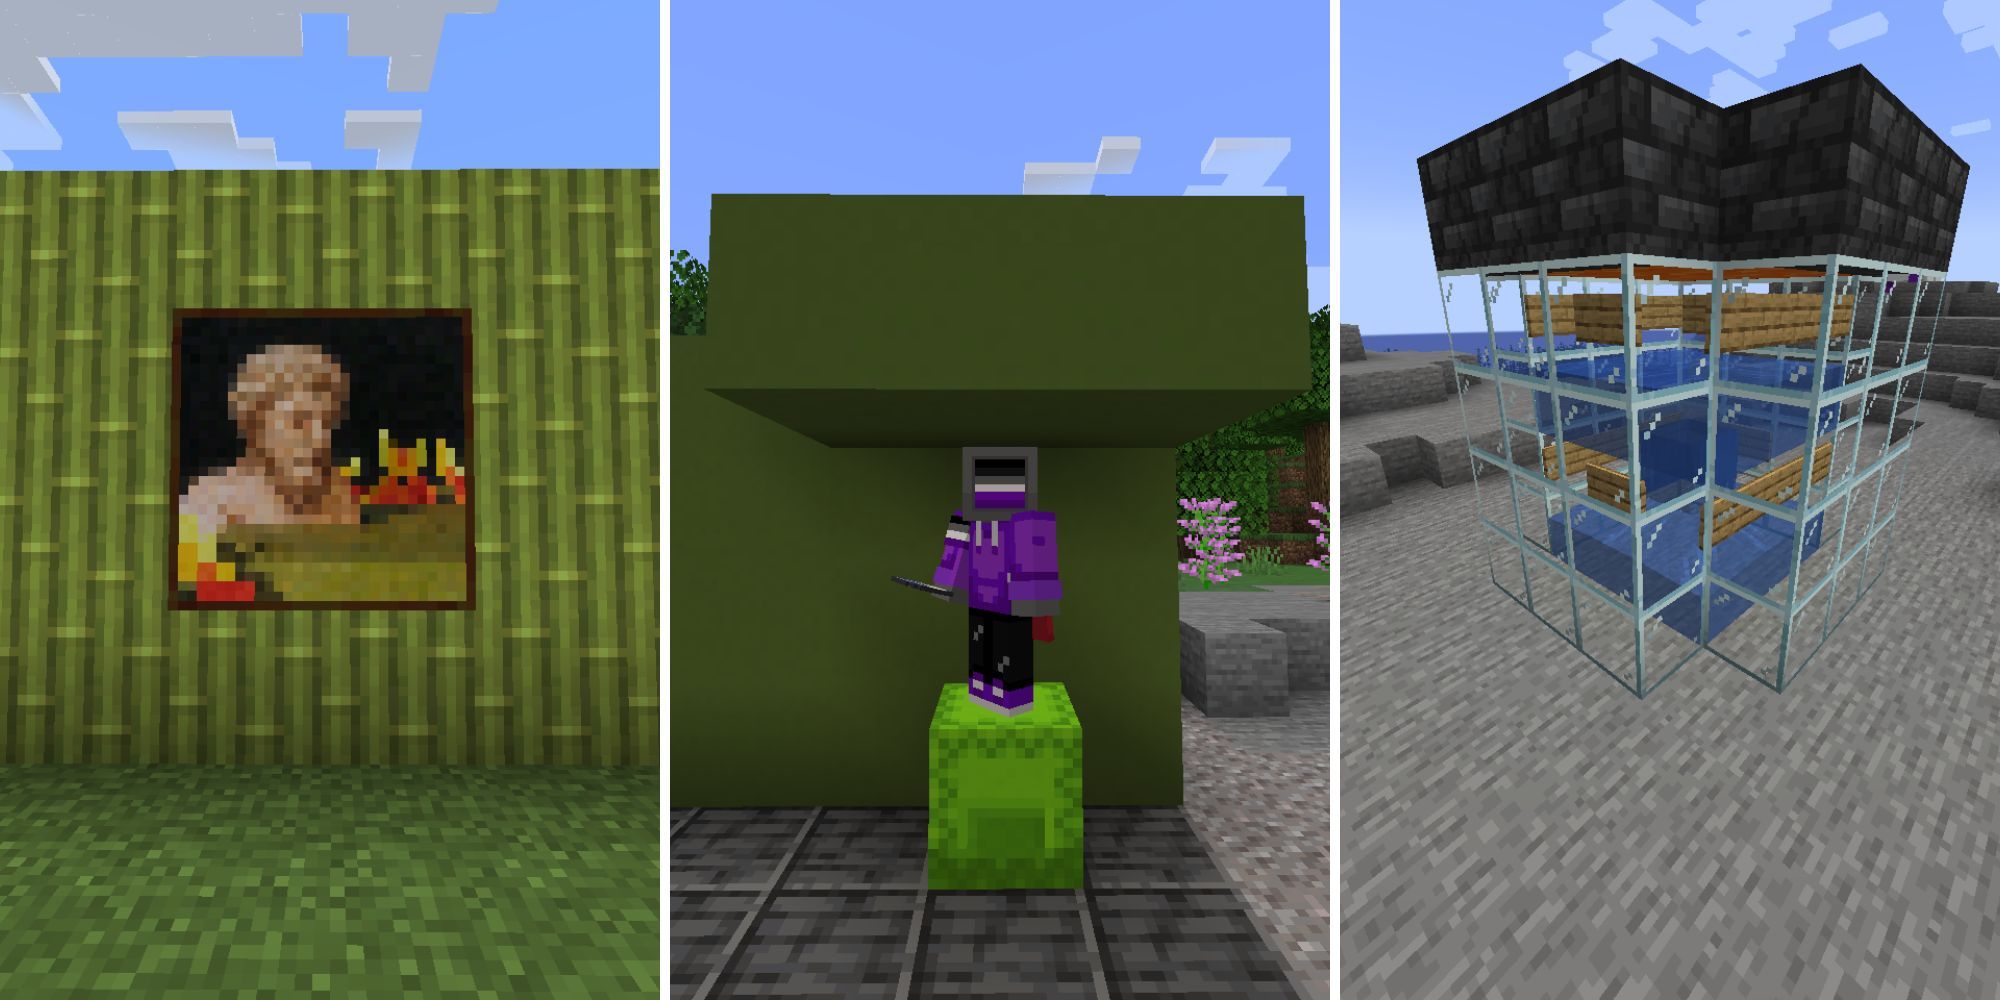 A split image of a bamboo wall with a painting on it, a player standing on a lime green shulker box, and a short glass tower with lava and water in it.